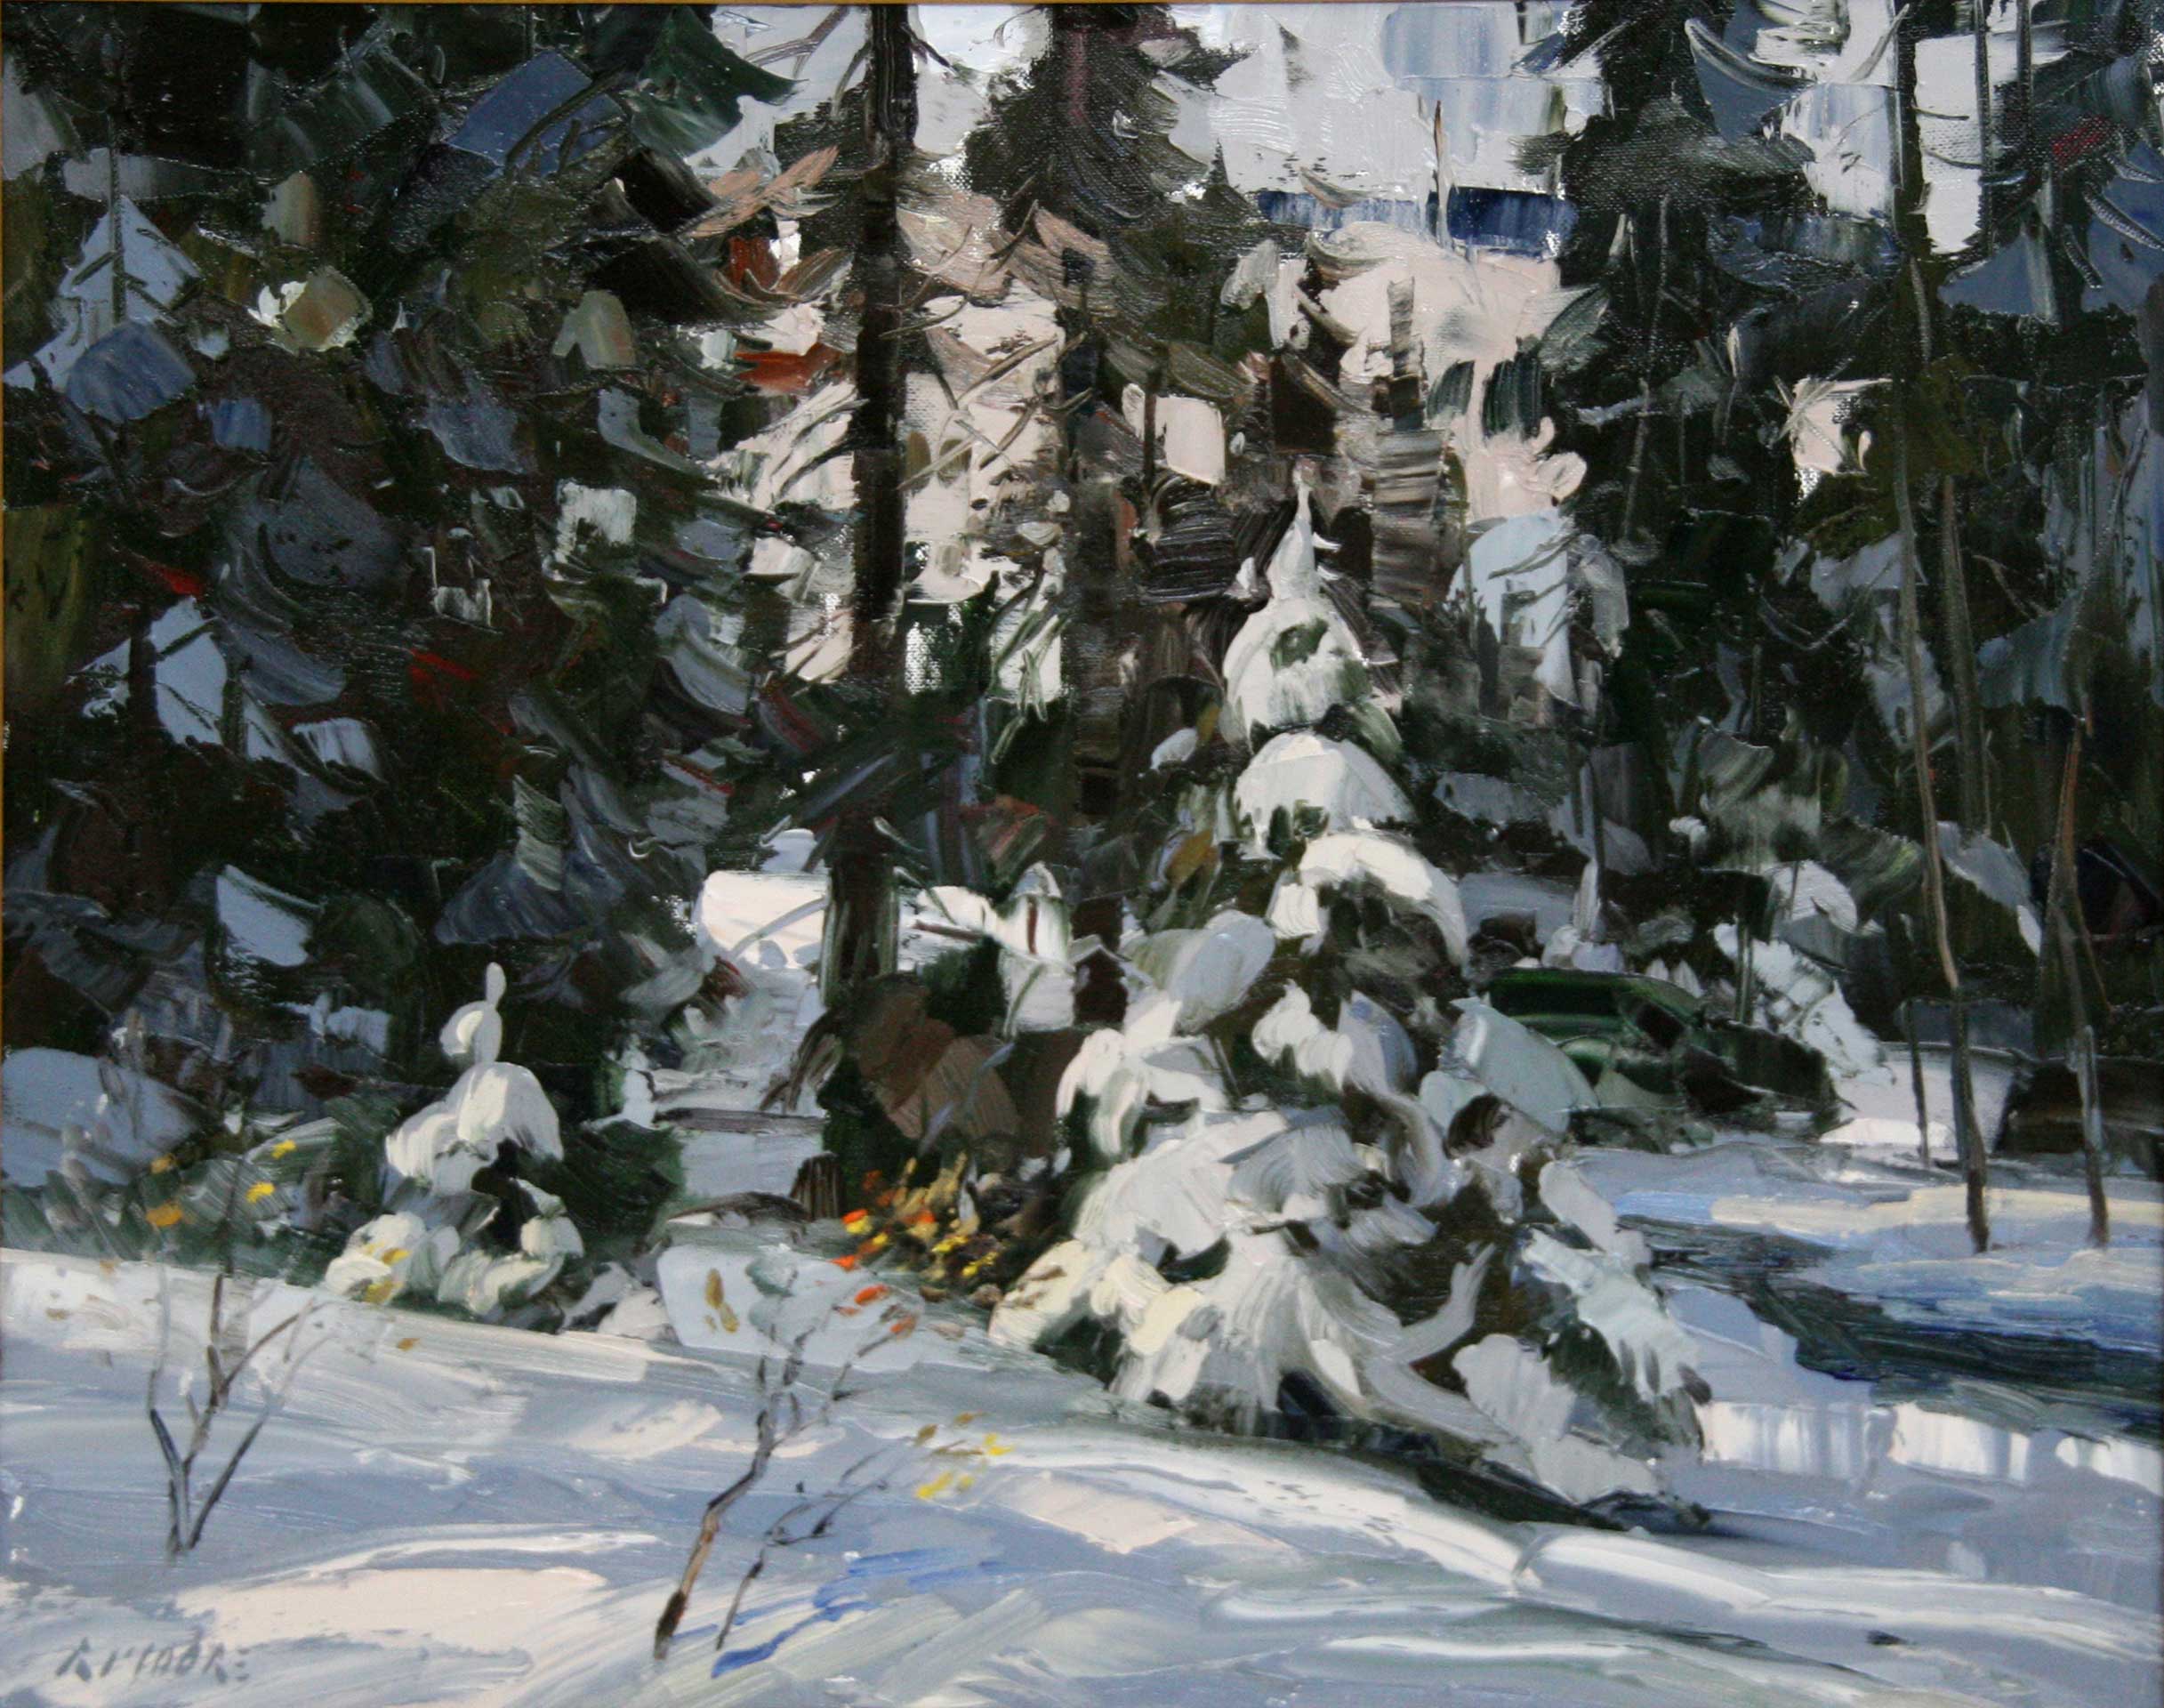 Robert Moore, "Heavy Snow," 20 x 24 inches, Oil on canvas